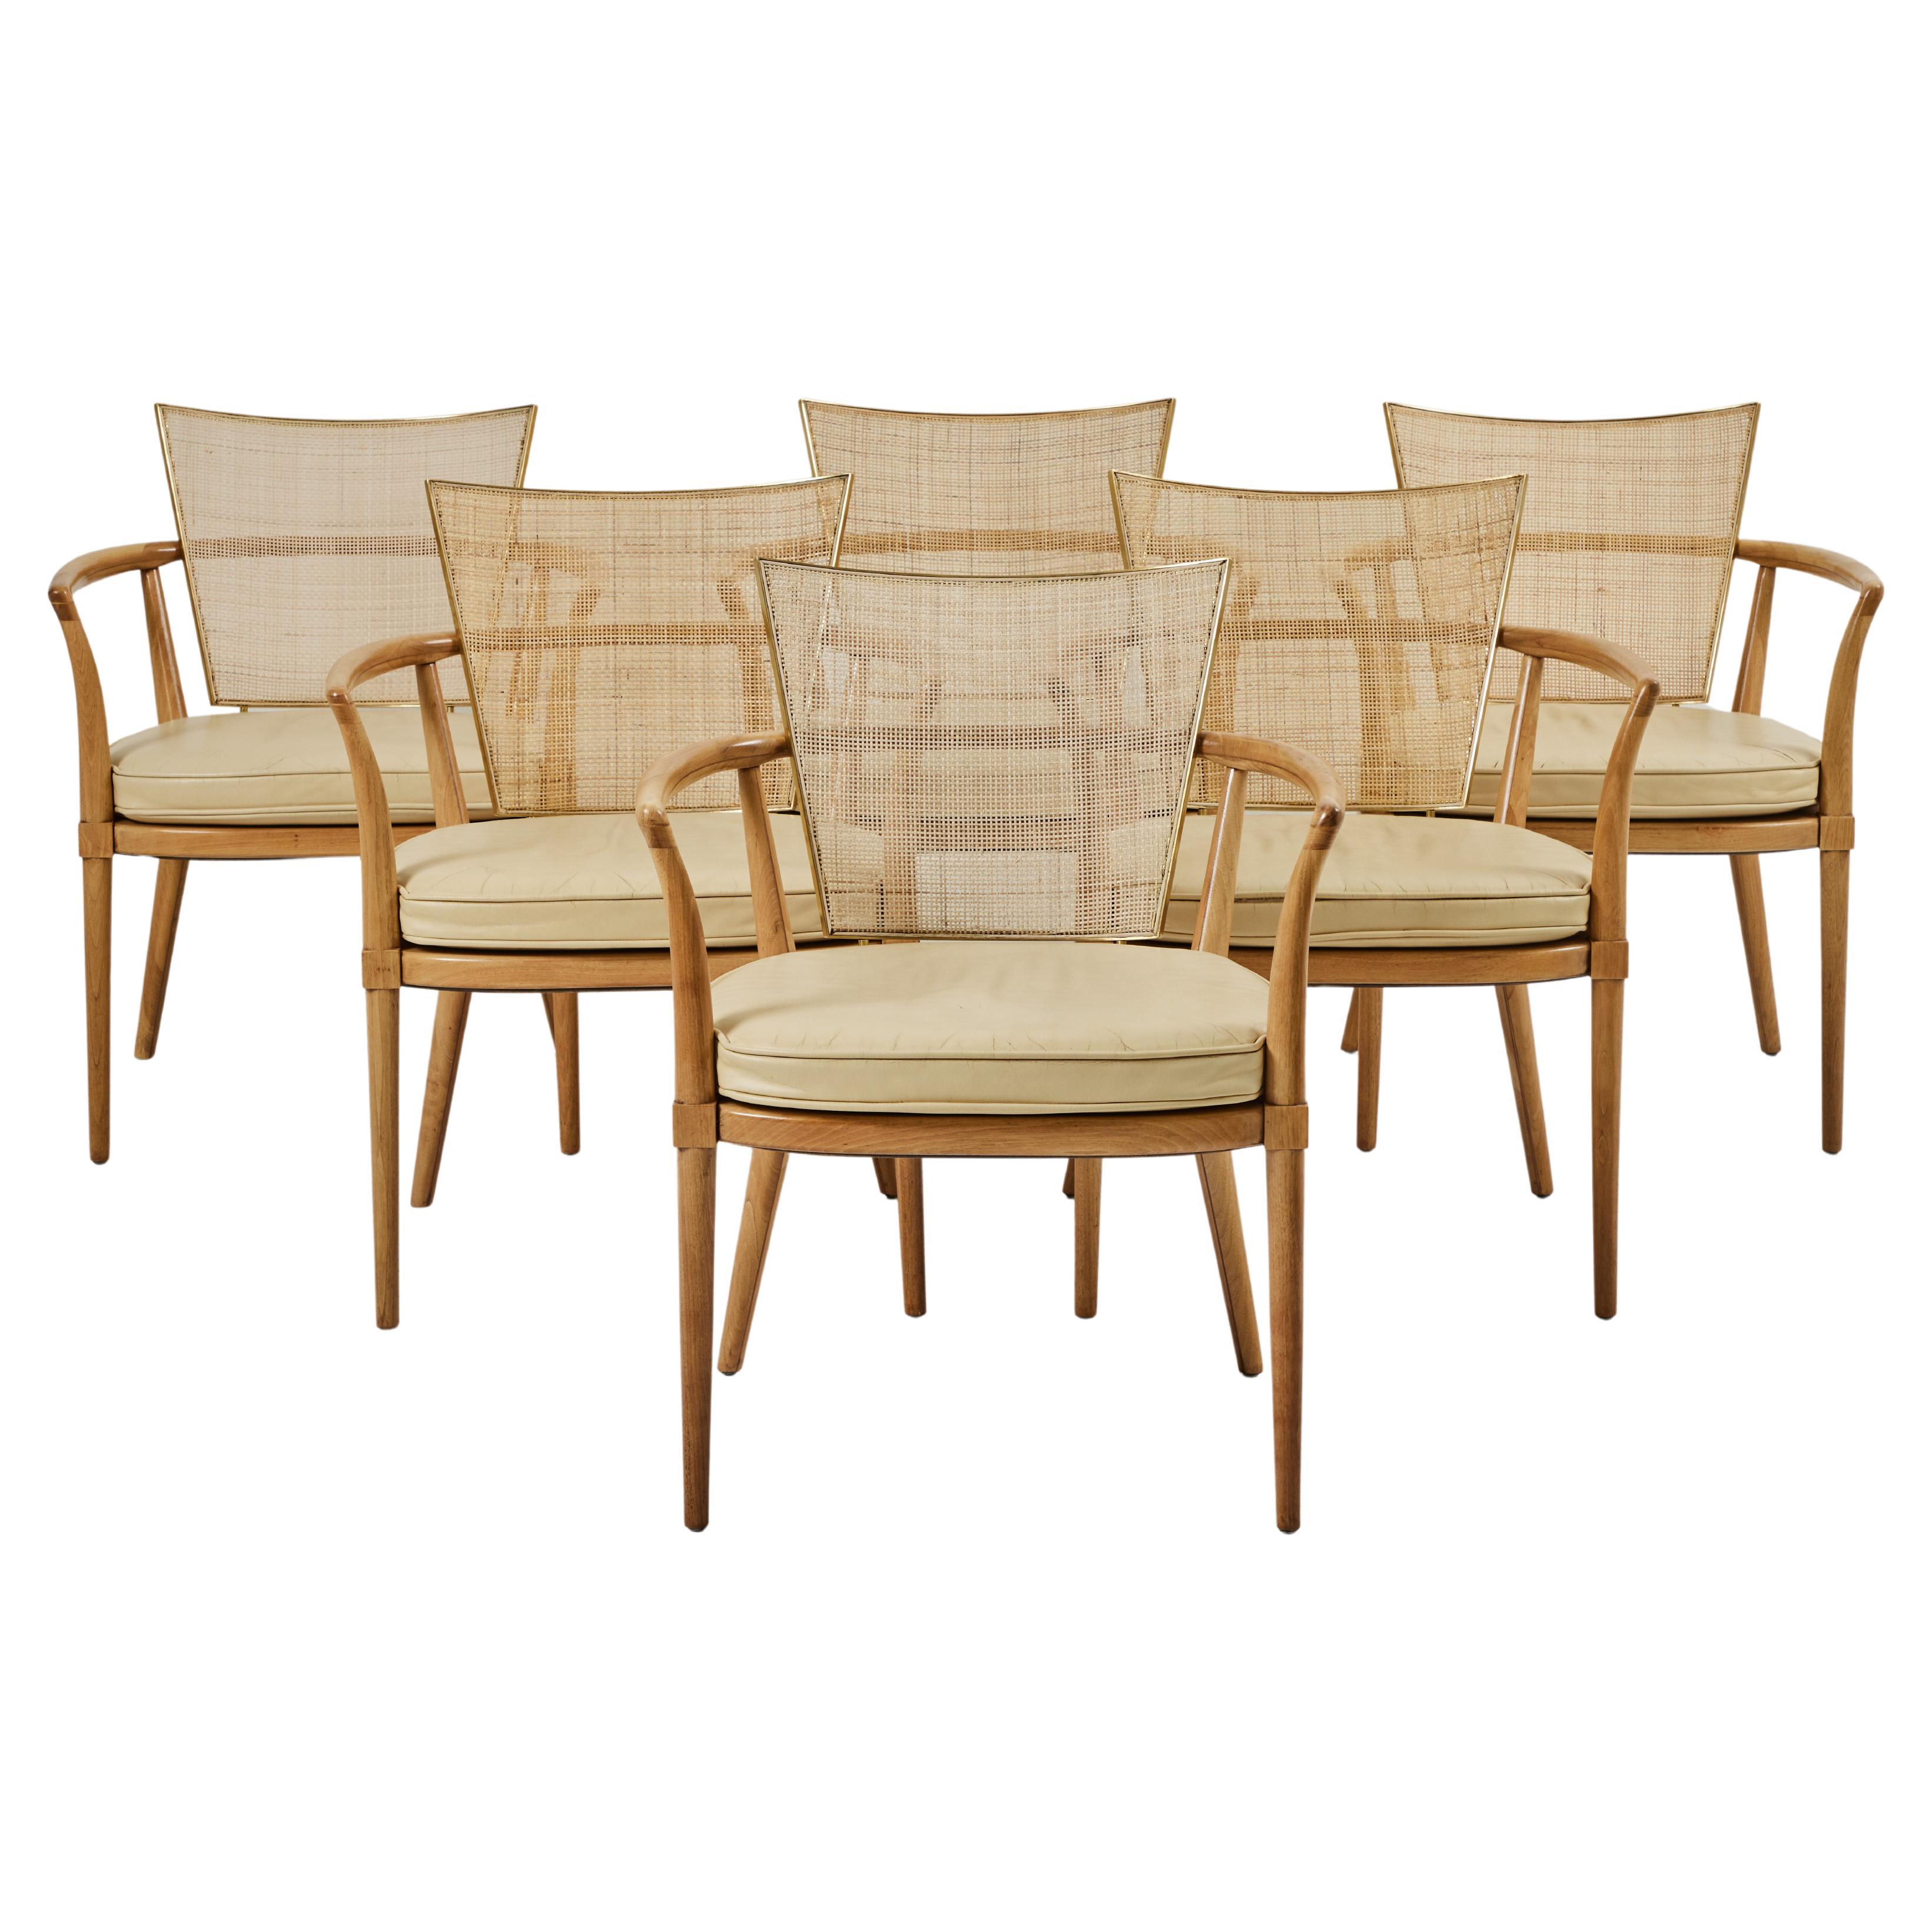 Set of 6 Bleached Walnut Dining Chairs by Bert England for Johnson Furniture